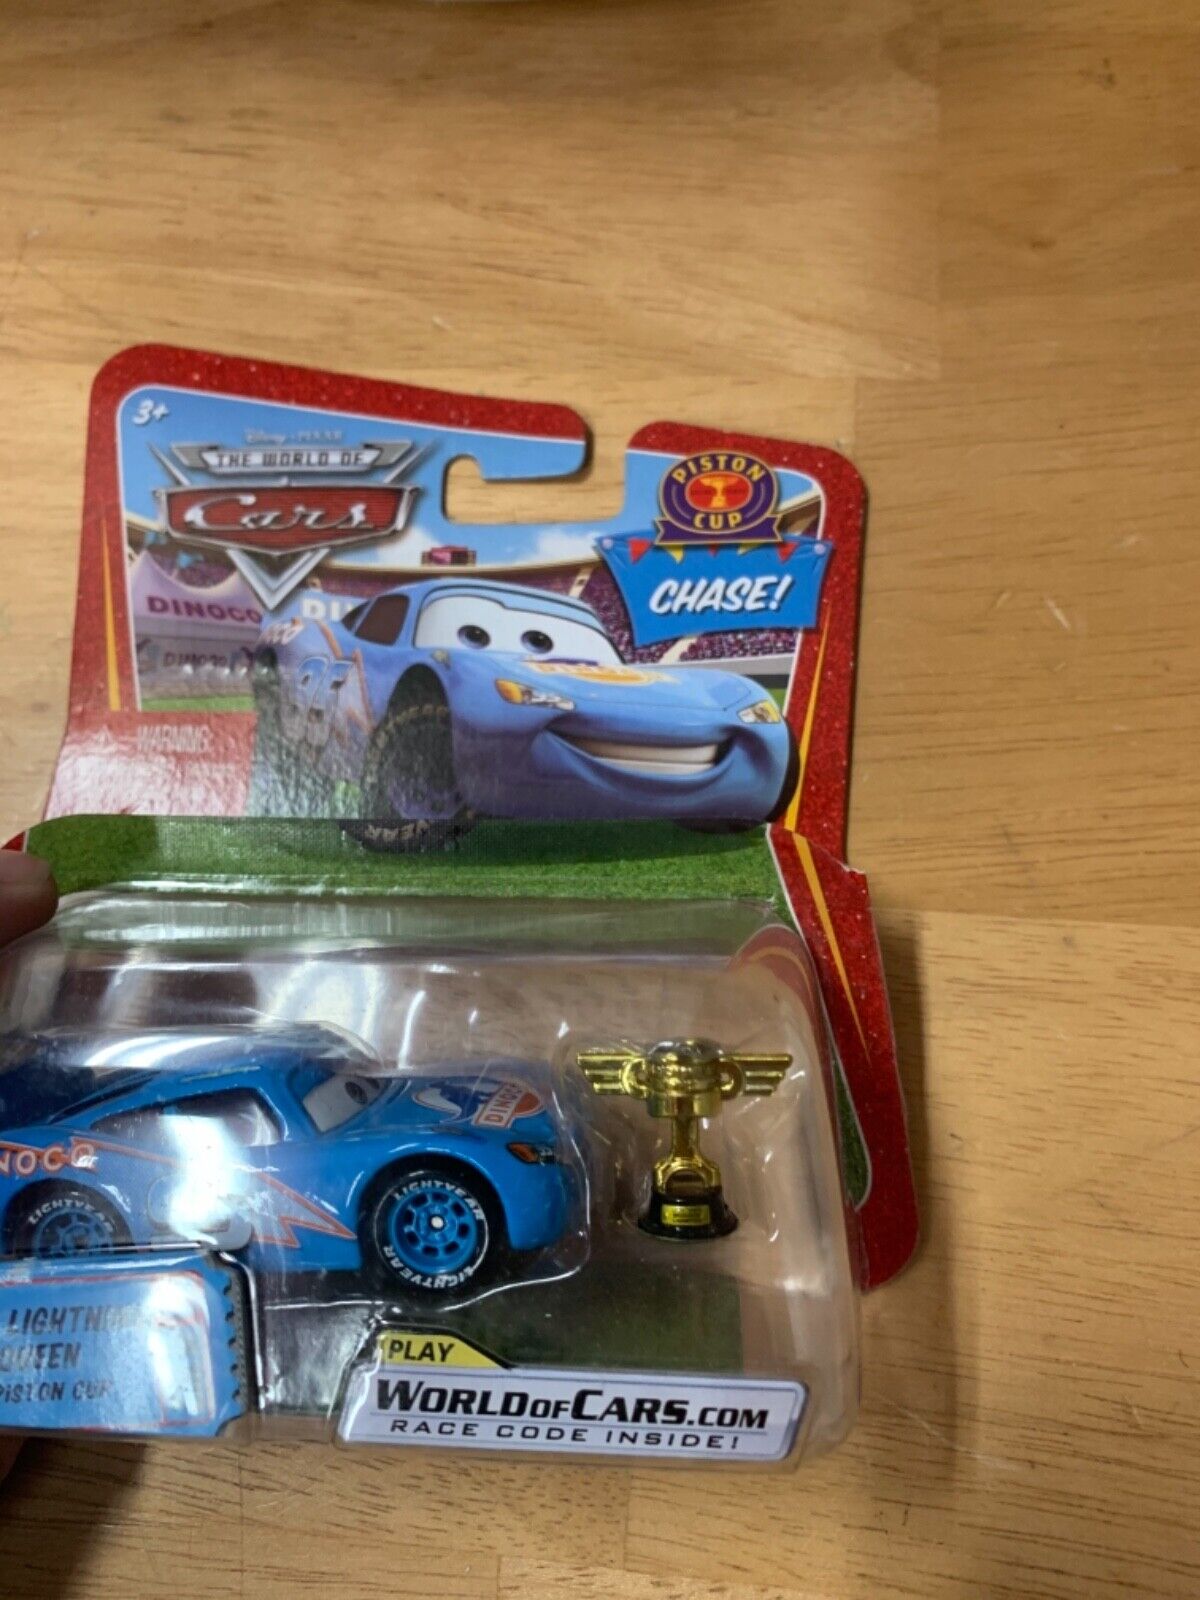 Disney Pixar Cars World of Cars Opened Dinoco Lightning McQueen Piston Cup CHASE